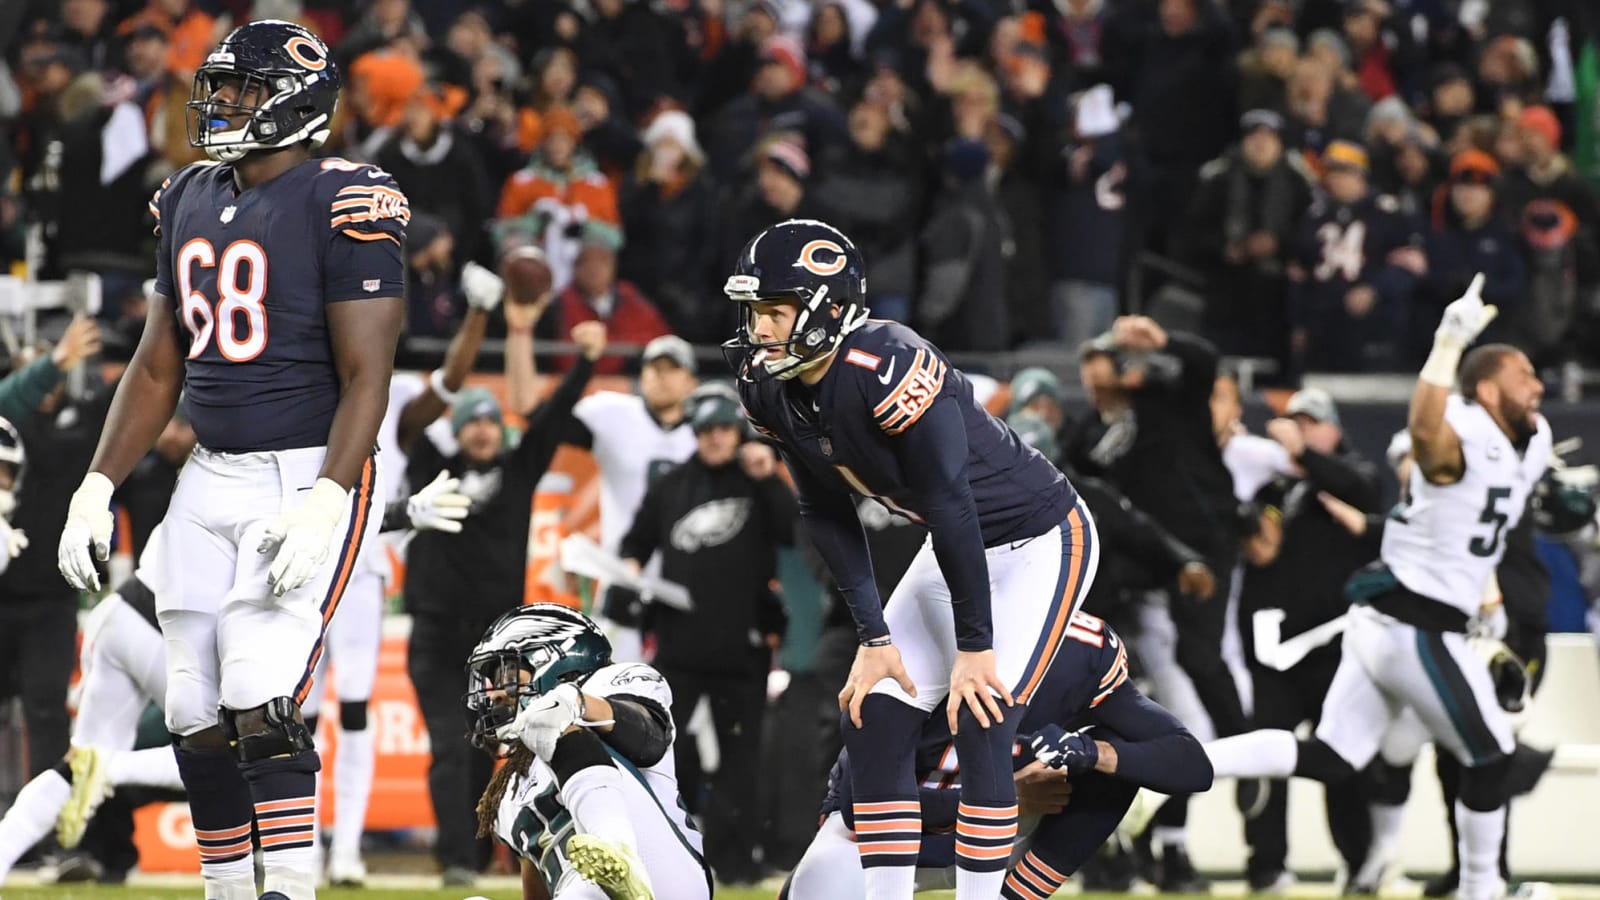 Twitter reacts to Cody Parkey missing game-winning FG on double-doink